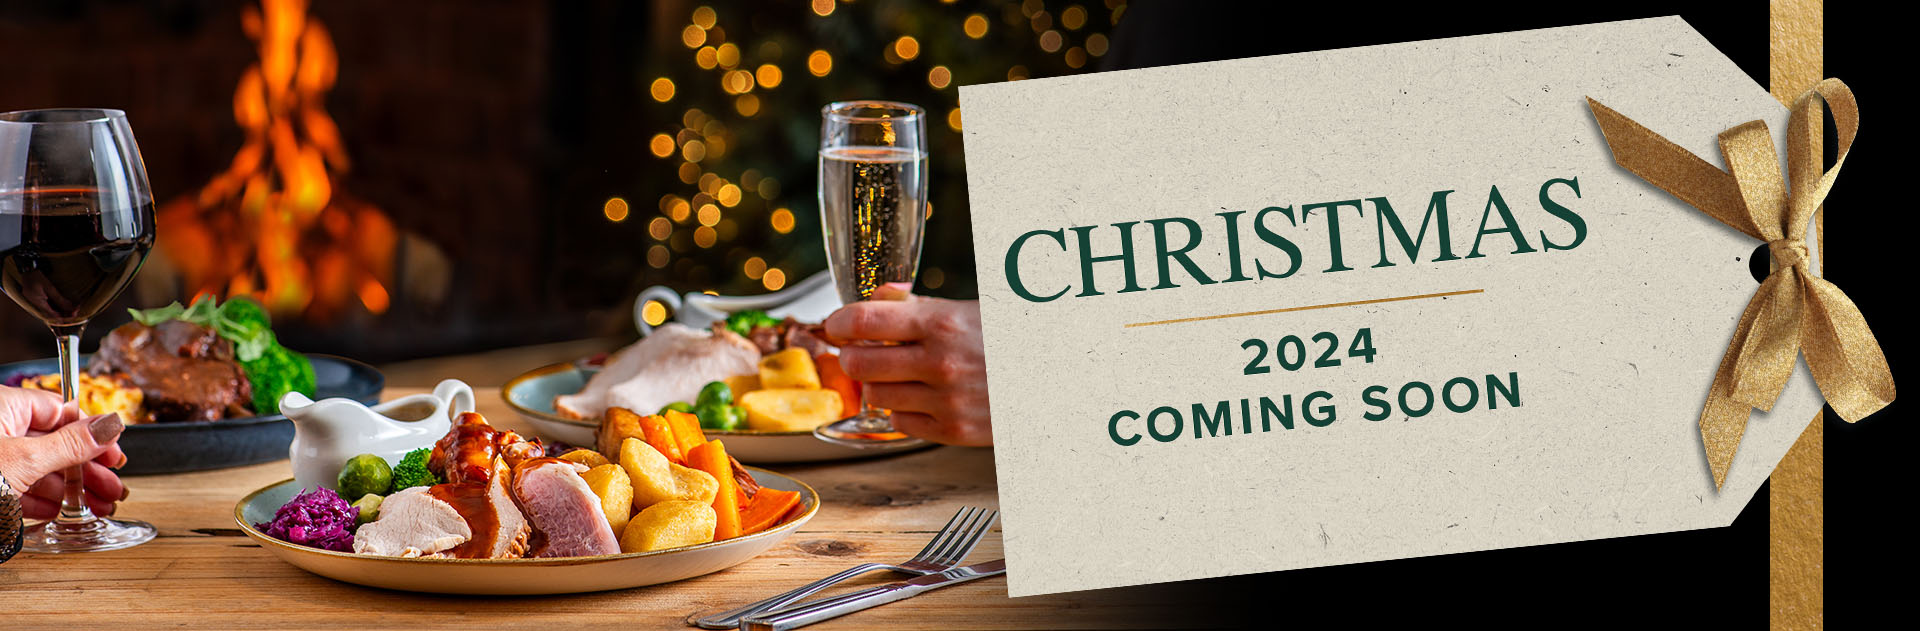 Christmas at The Anderton Arms 